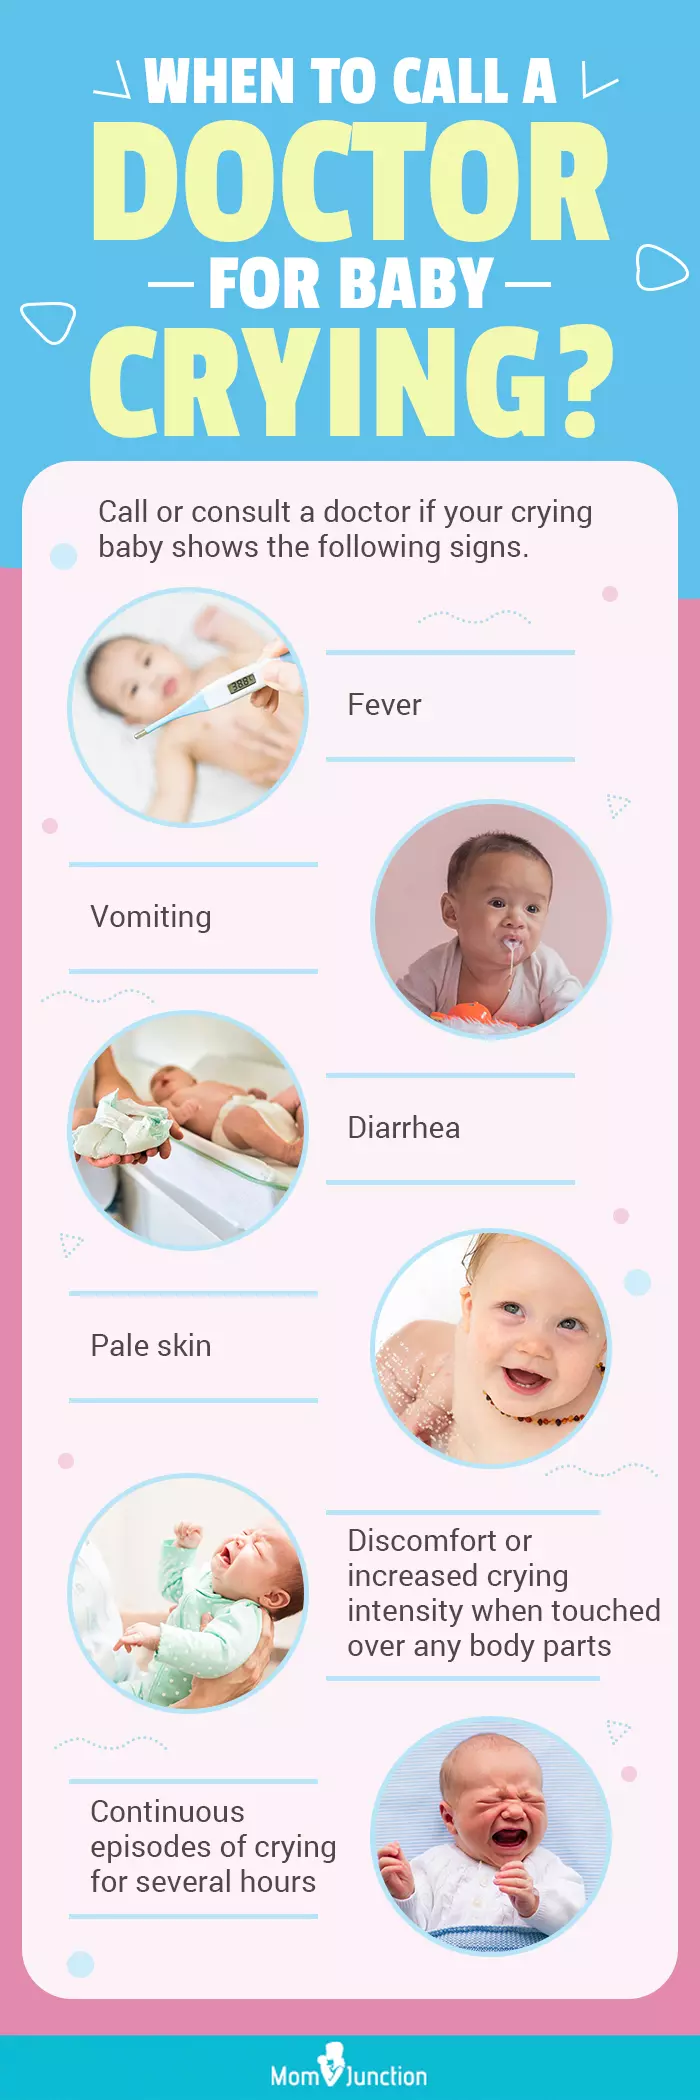 when to call a doctor for baby crying (infographic)